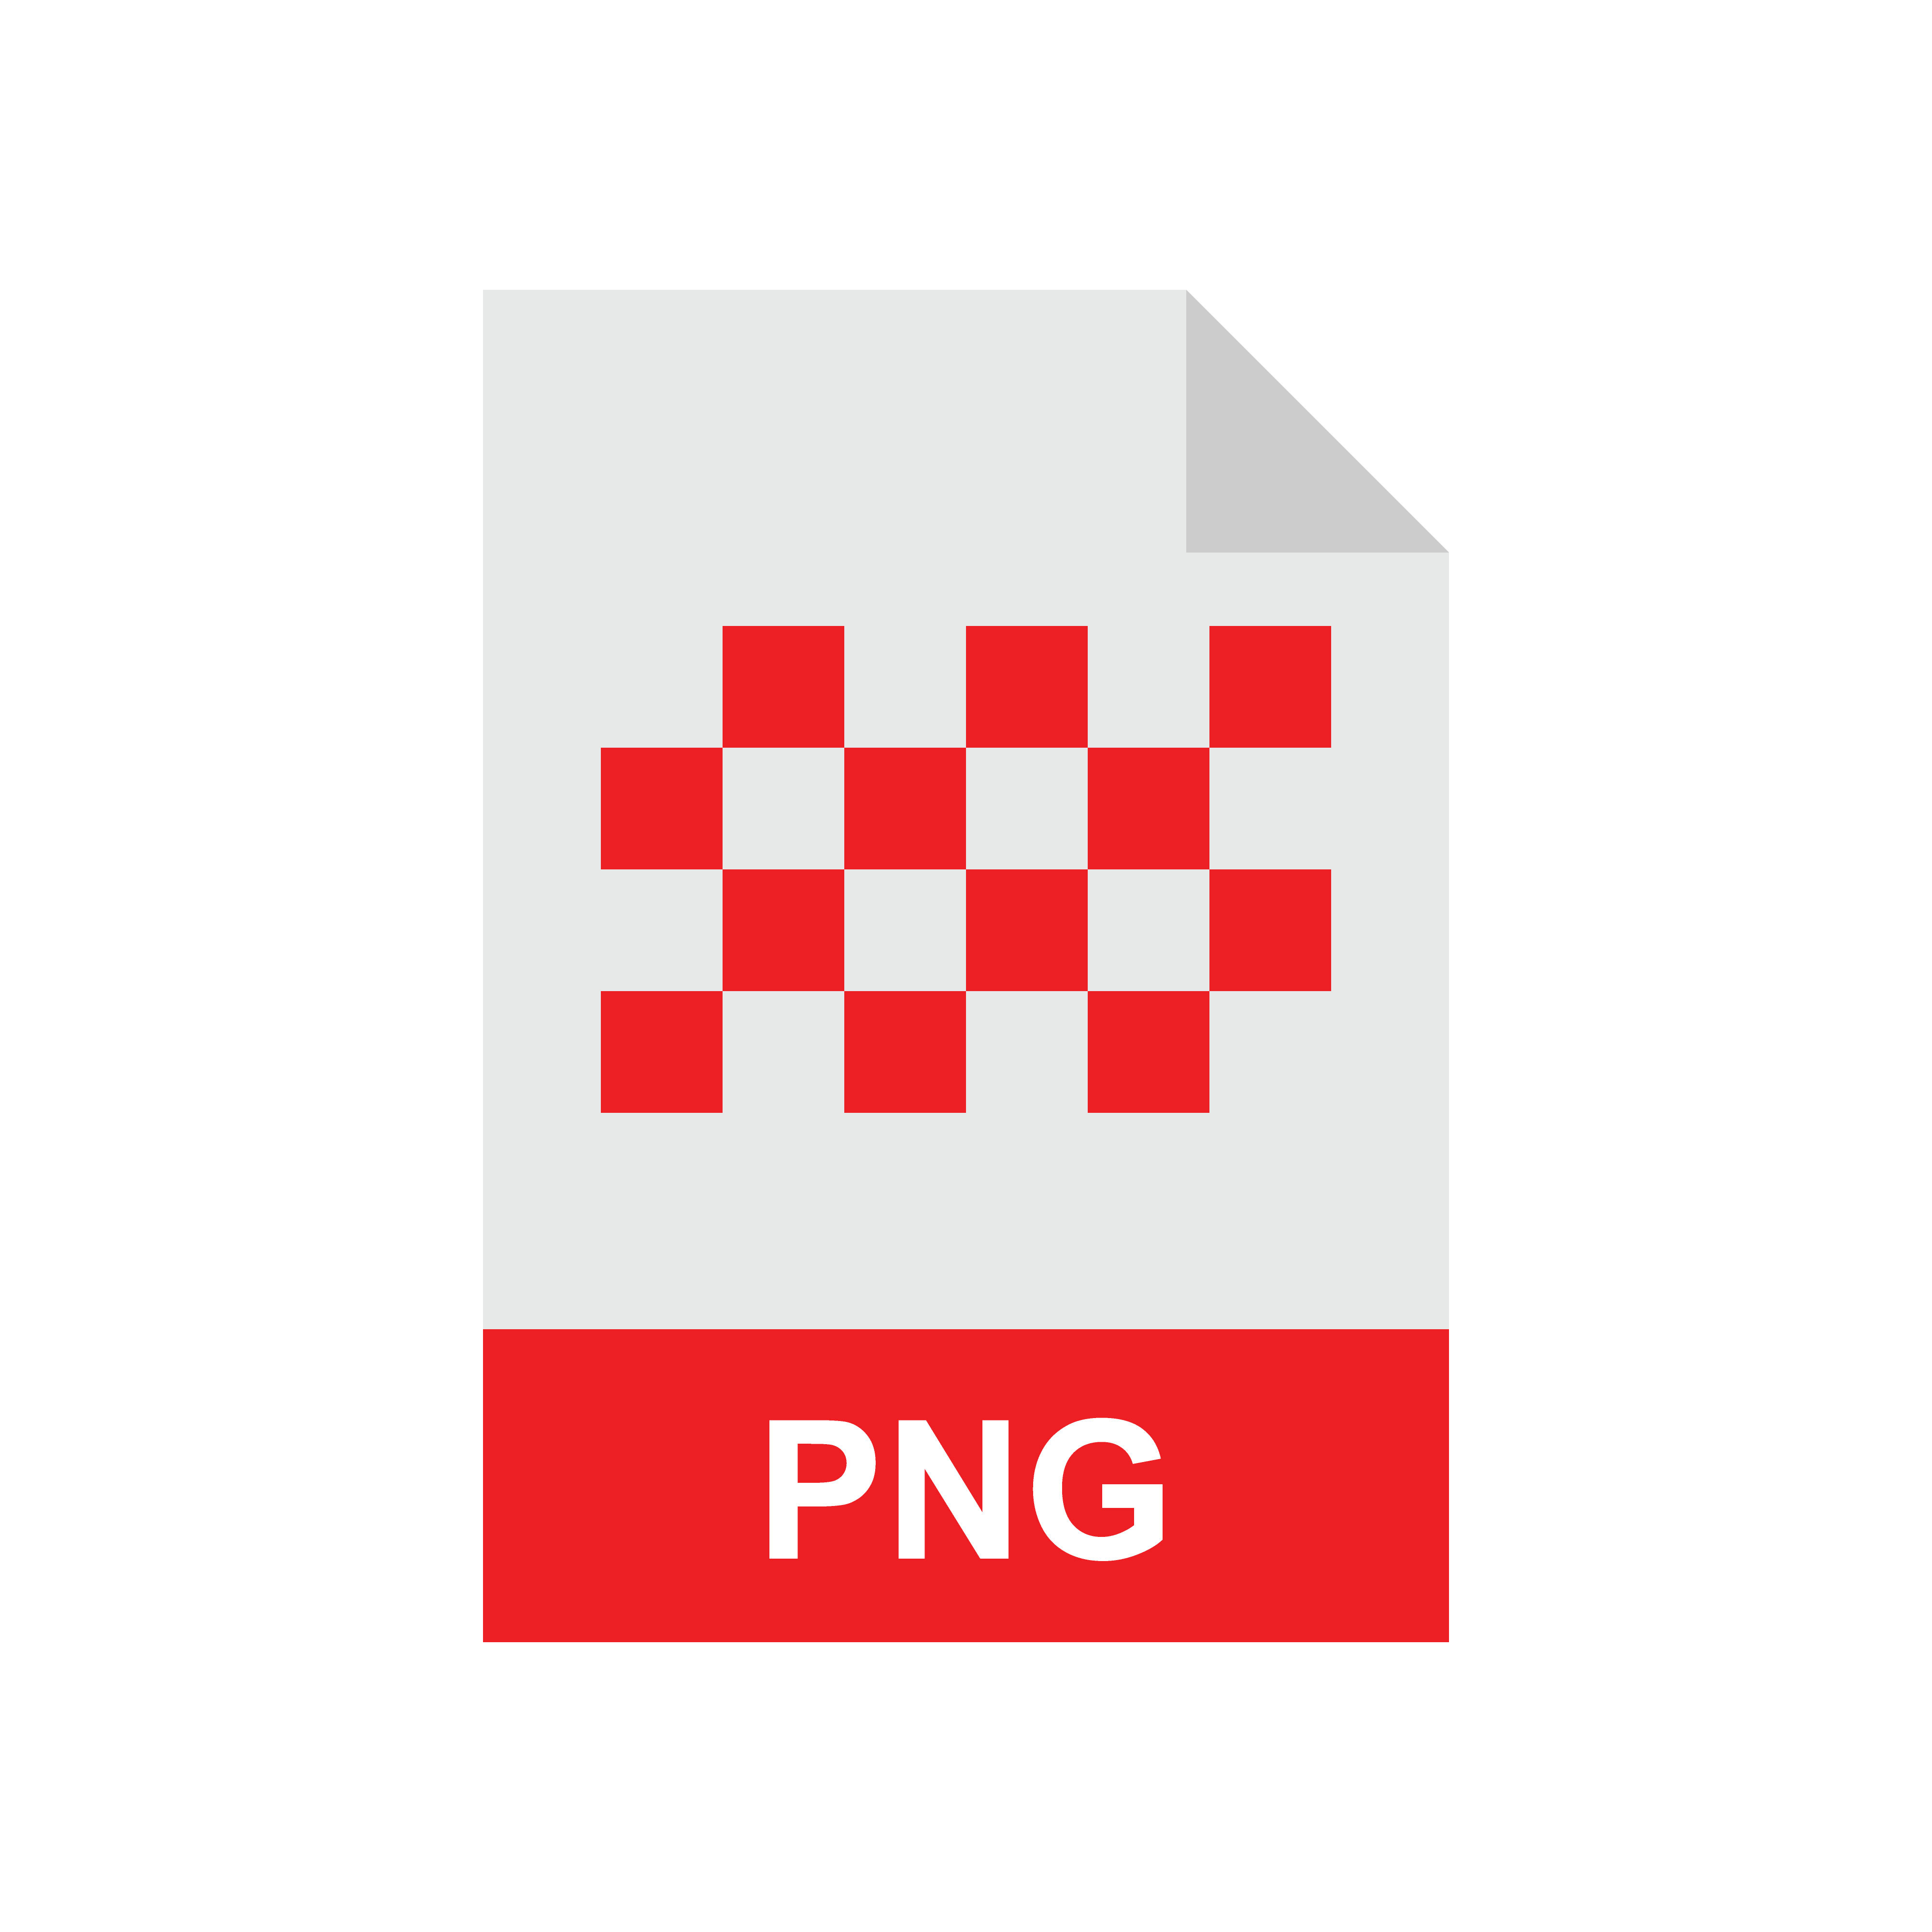 PNG format file vector icon. PNG format file Template for your design